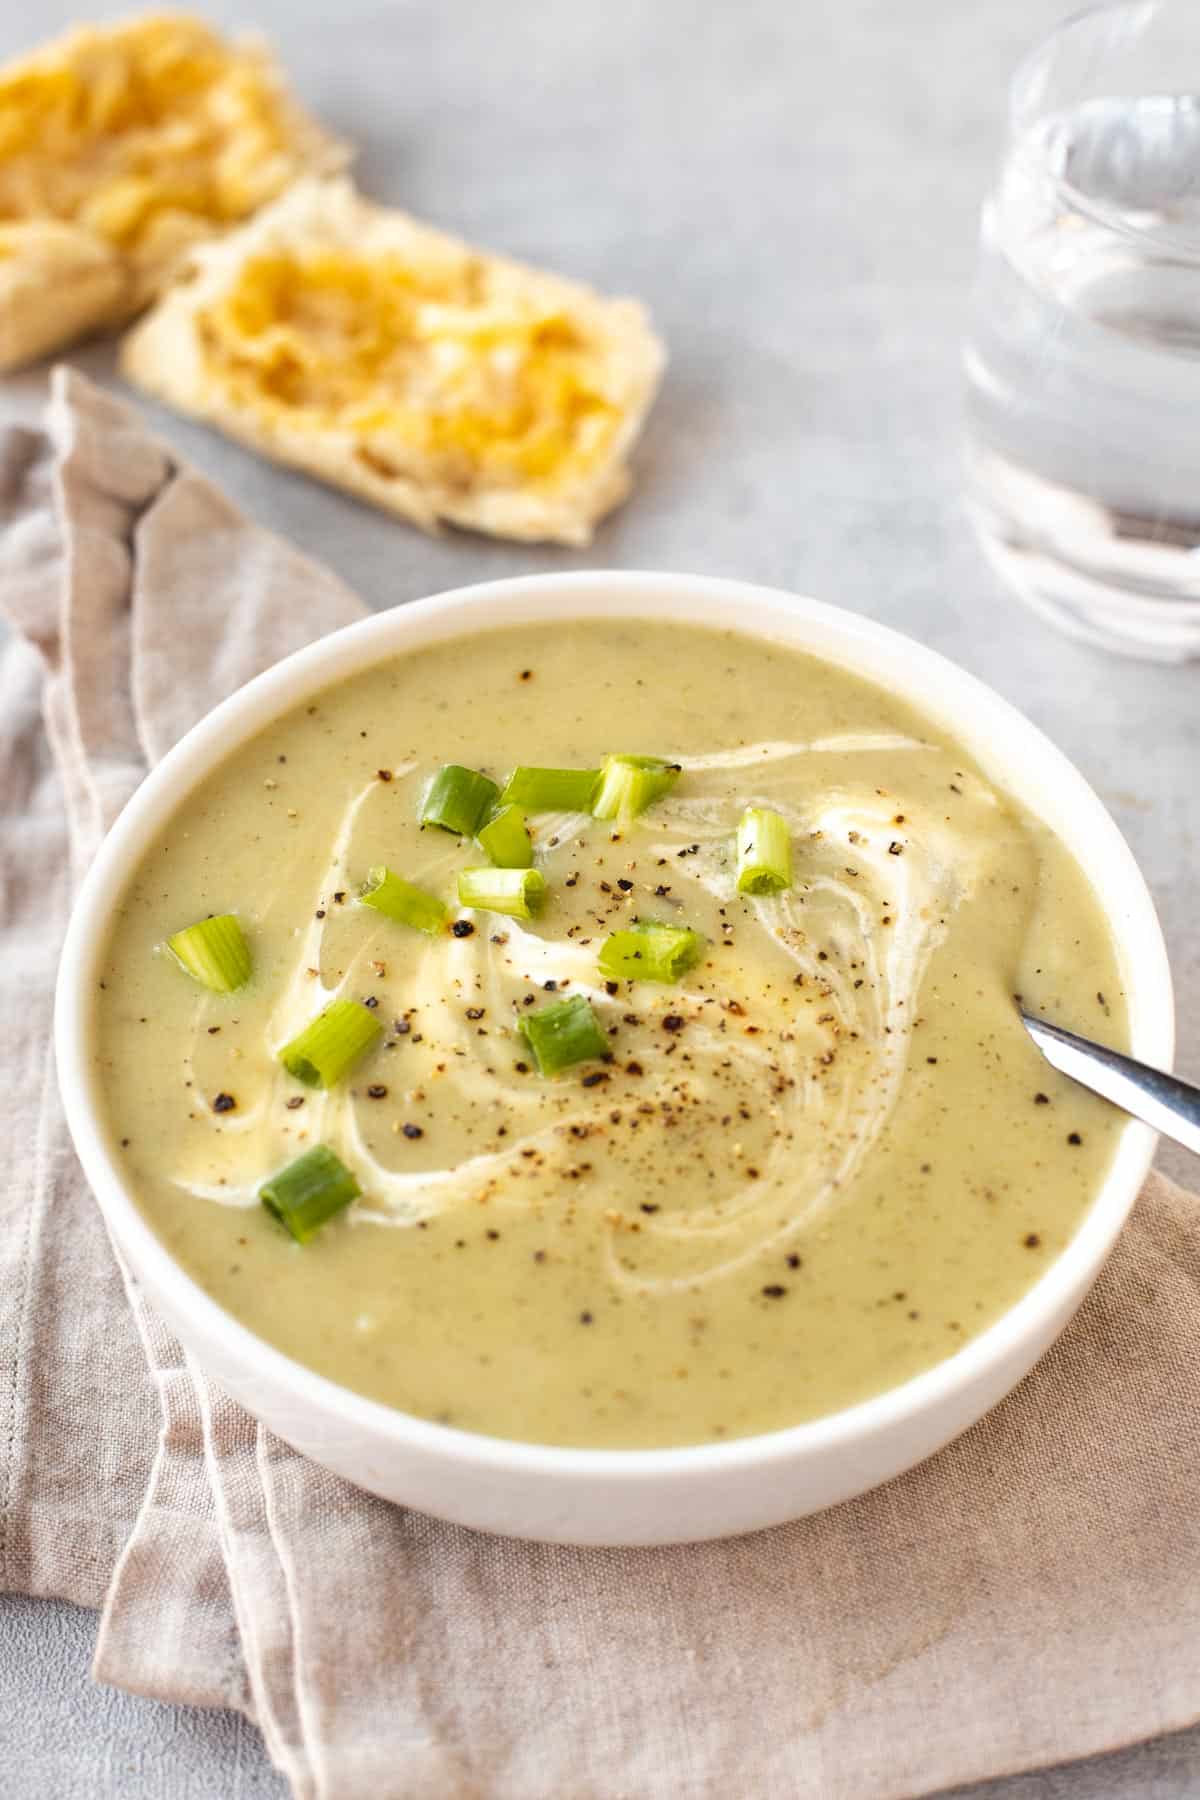 A bowlful of creamy potato and spring onion soup drizzled with cream.